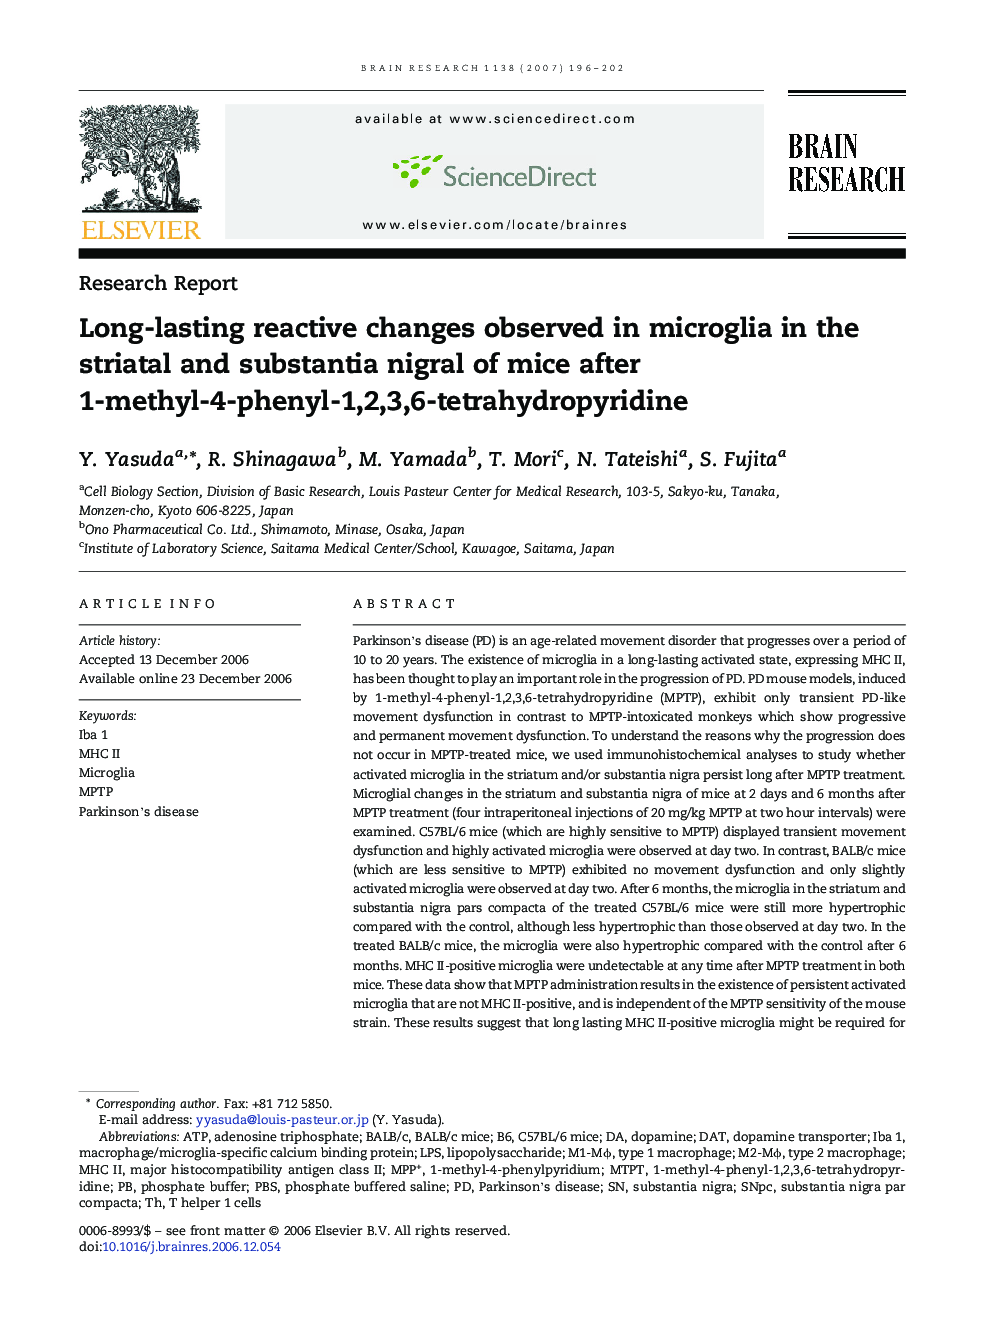 Long-lasting reactive changes observed in microglia in the striatal and substantia nigral of mice after 1-methyl-4-phenyl-1,2,3,6-tetrahydropyridine